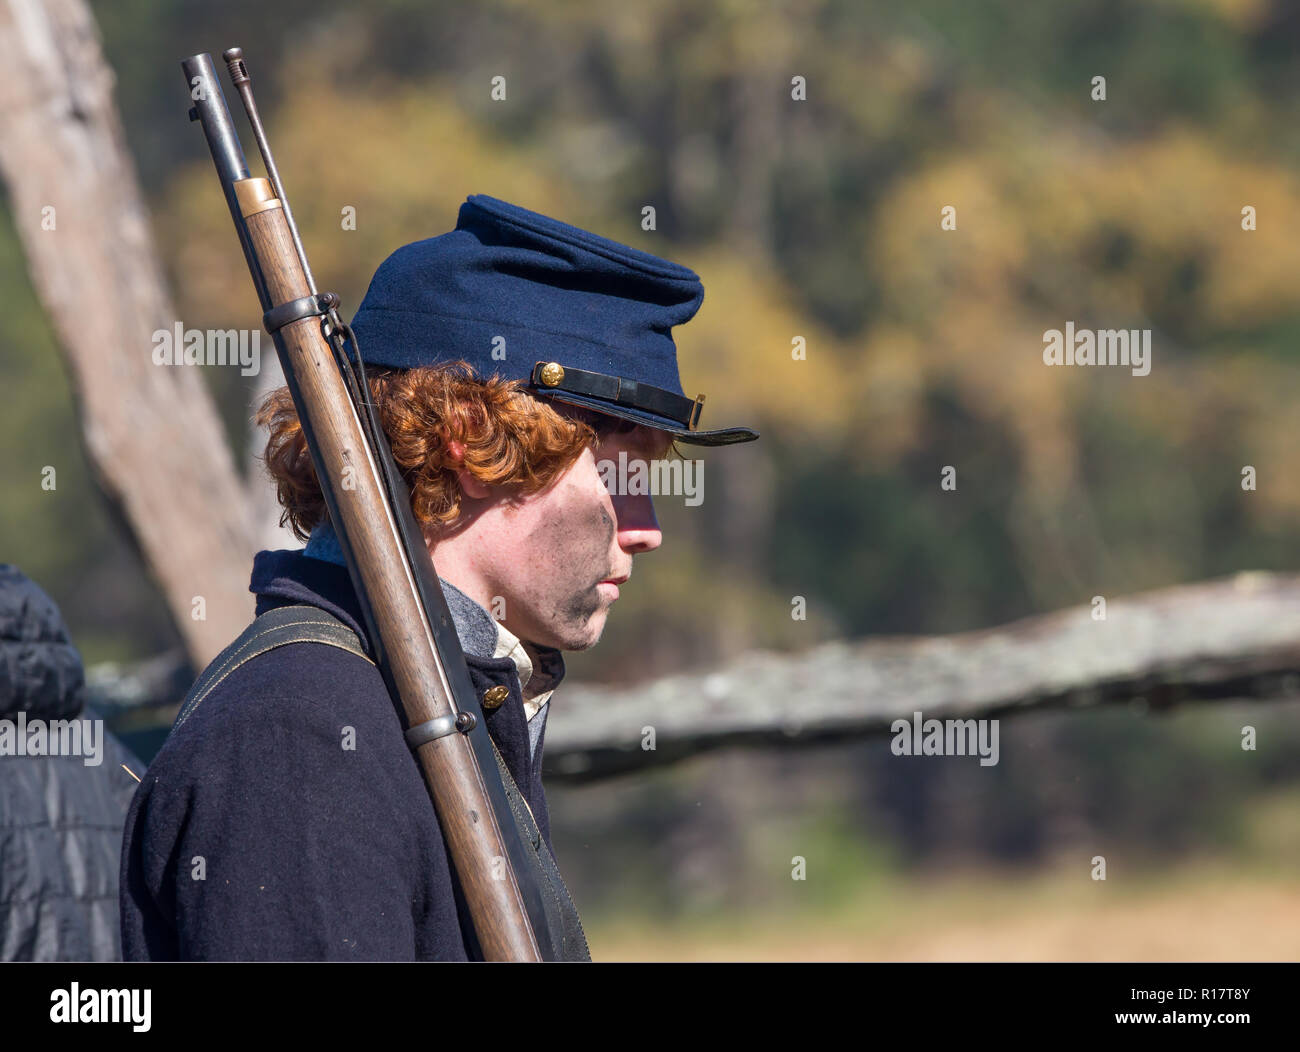 MCCONNELLS, SC (USA) - November 3, 2018:  Closeup portrait of a reenactor portraying a Union soldier at an American Civil War reenactment. Stock Photo